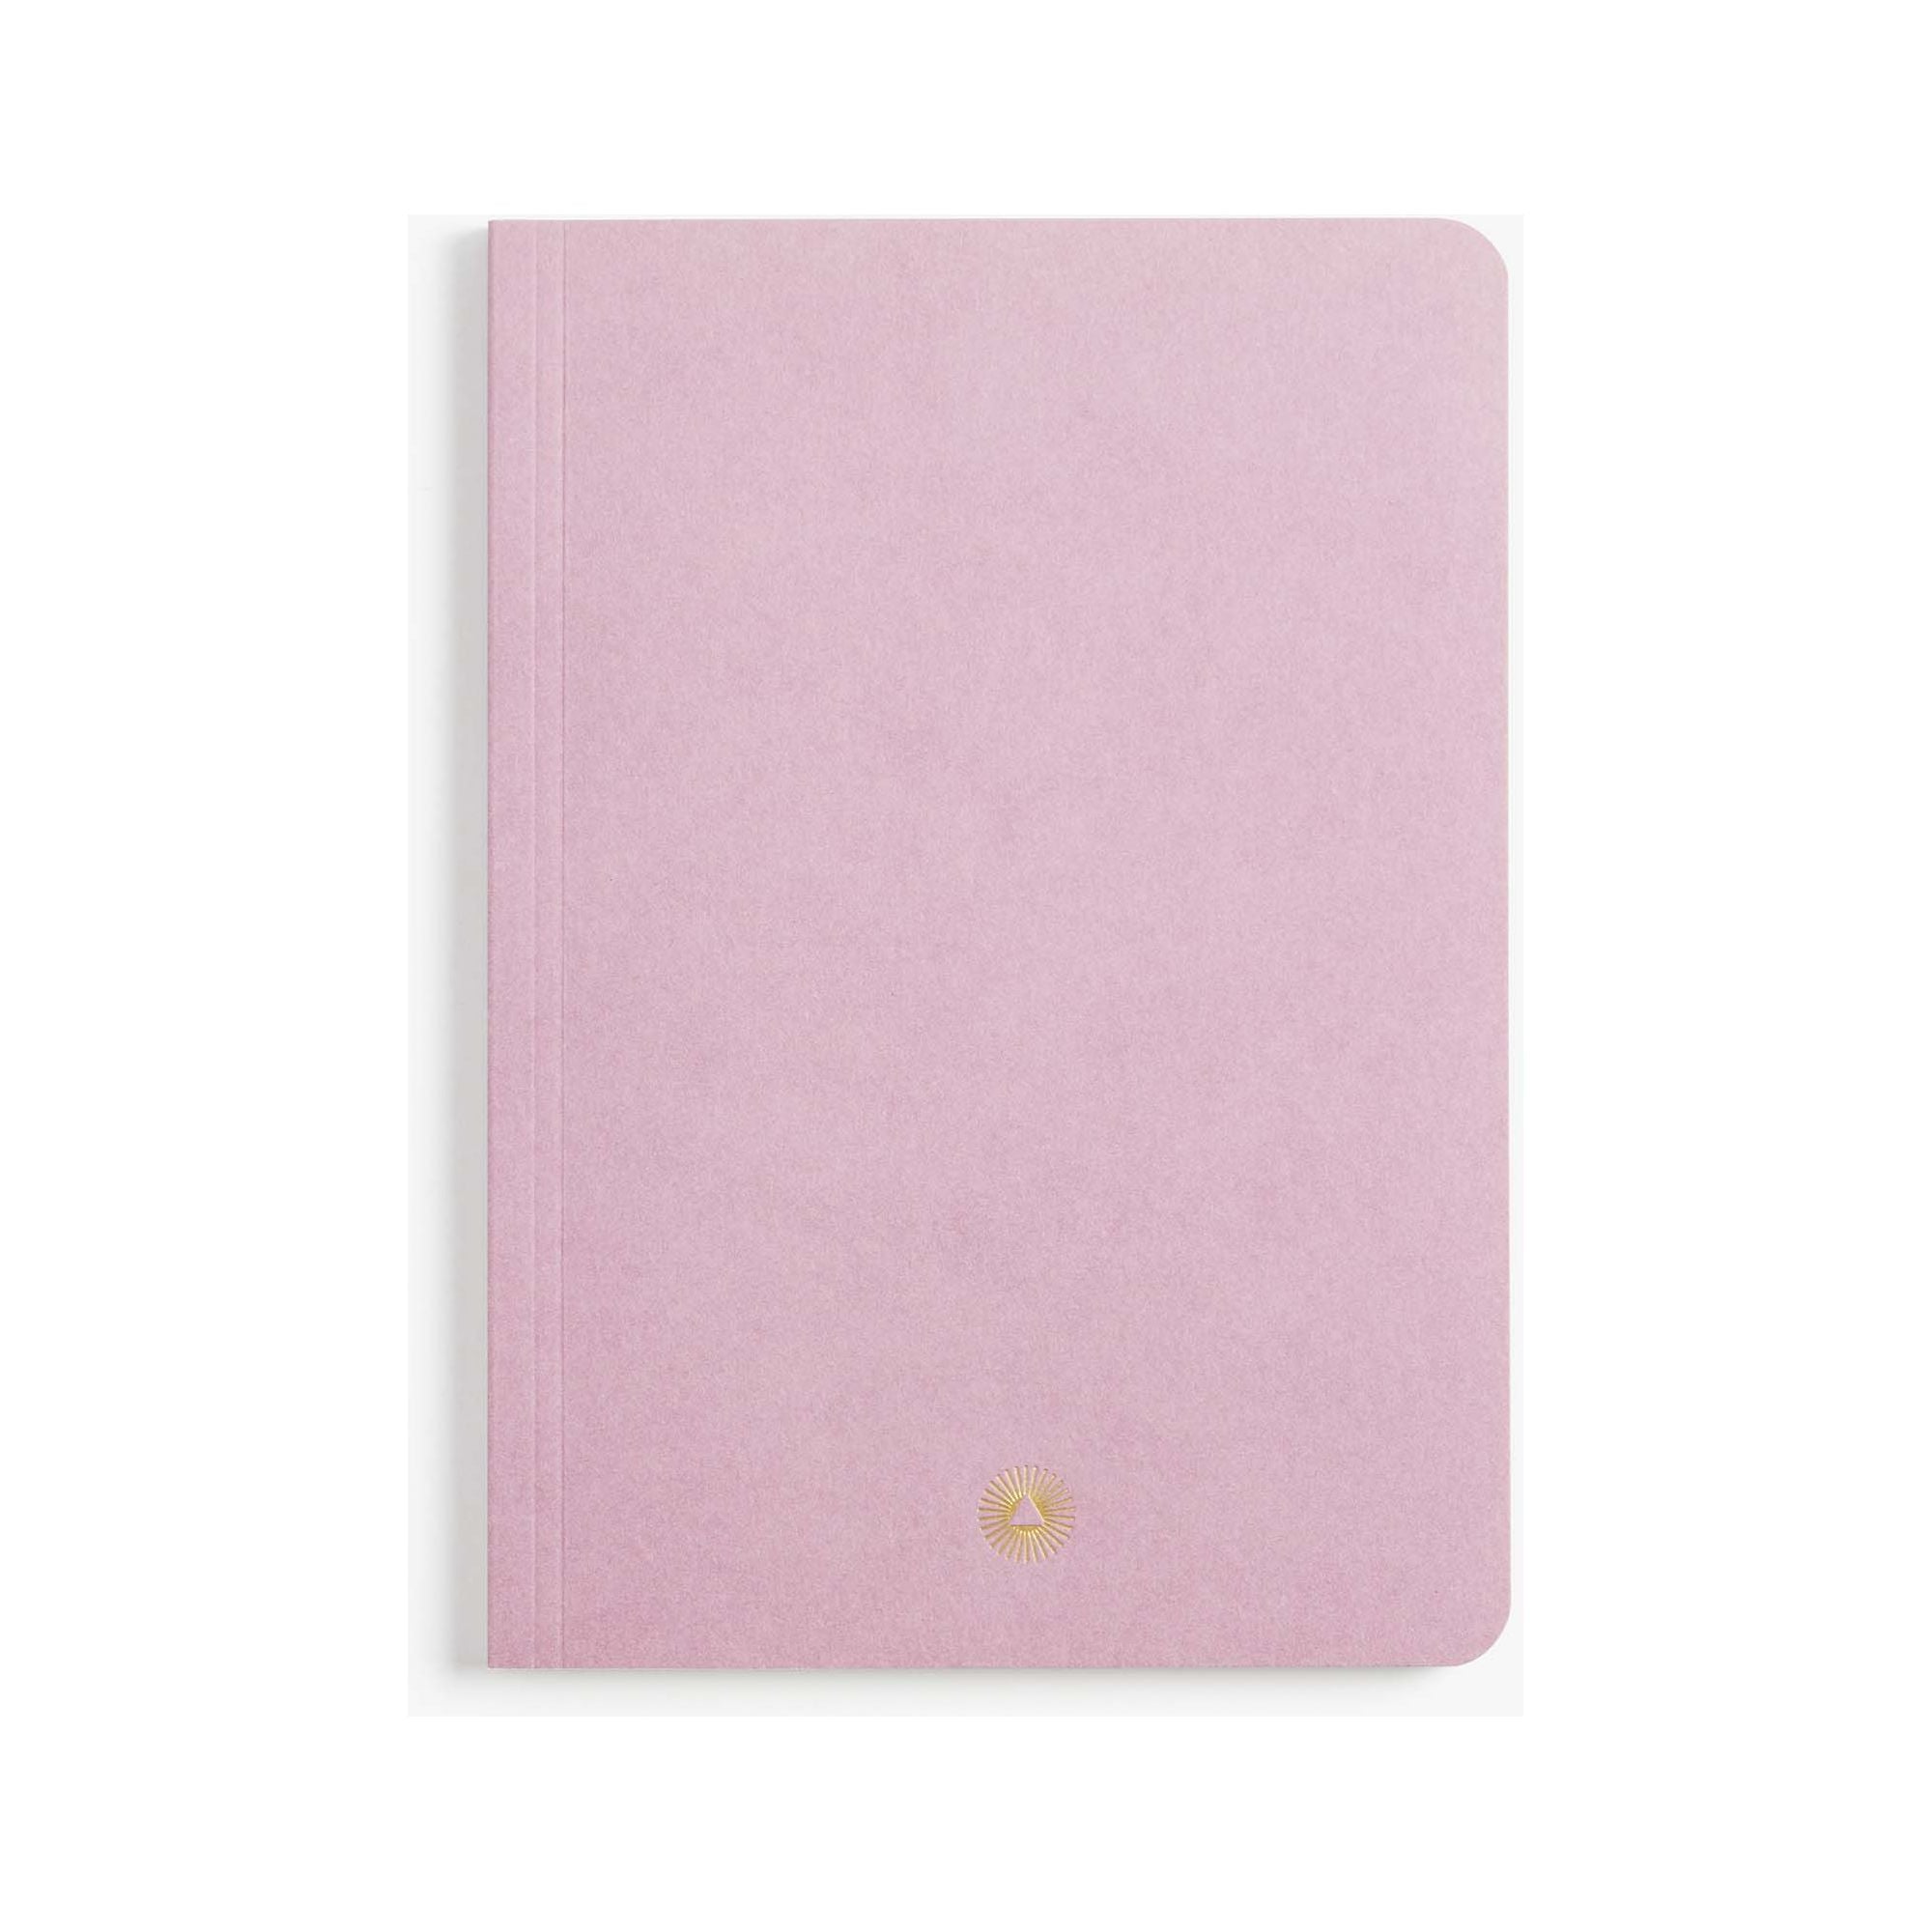 Pastel Beauty Notebook: Light Pink Blank Page Journal | Blank Numbered  Notebook | Pastel Color Notebook | 6x9inch 100 pages